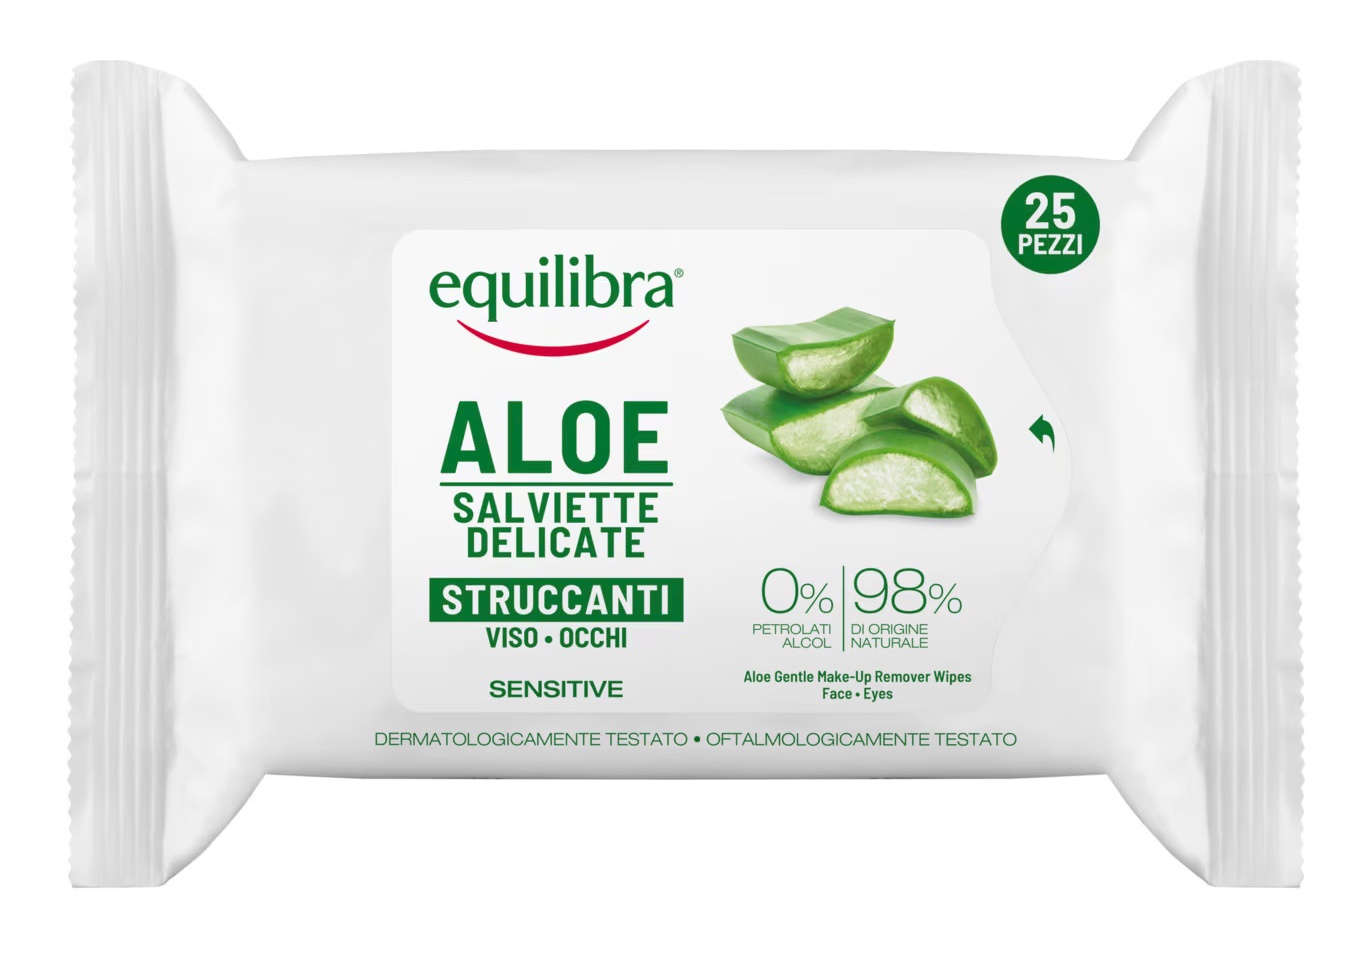 Equilibra Aloe Gentle Make-Up Remover Wipes